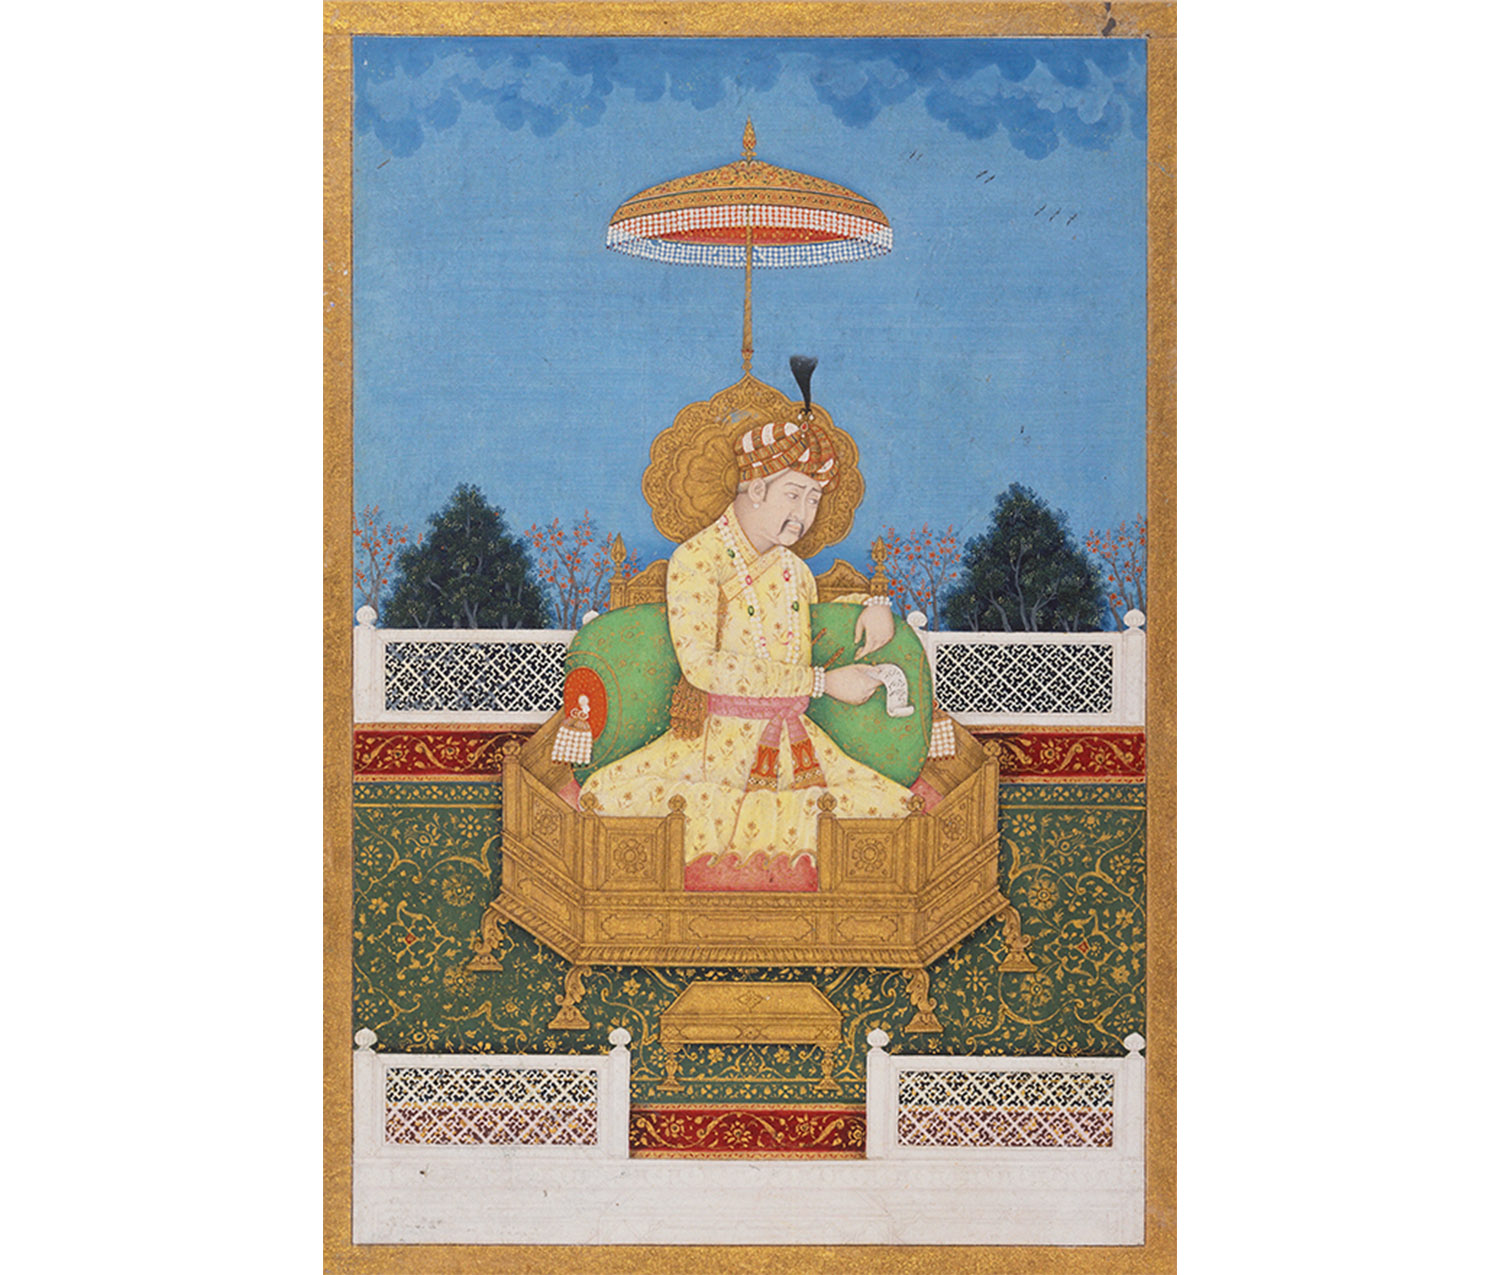 A portrait of the Muslim emperor Akbar reclines on his throne above a richly decorated carpet as he looks over official documents